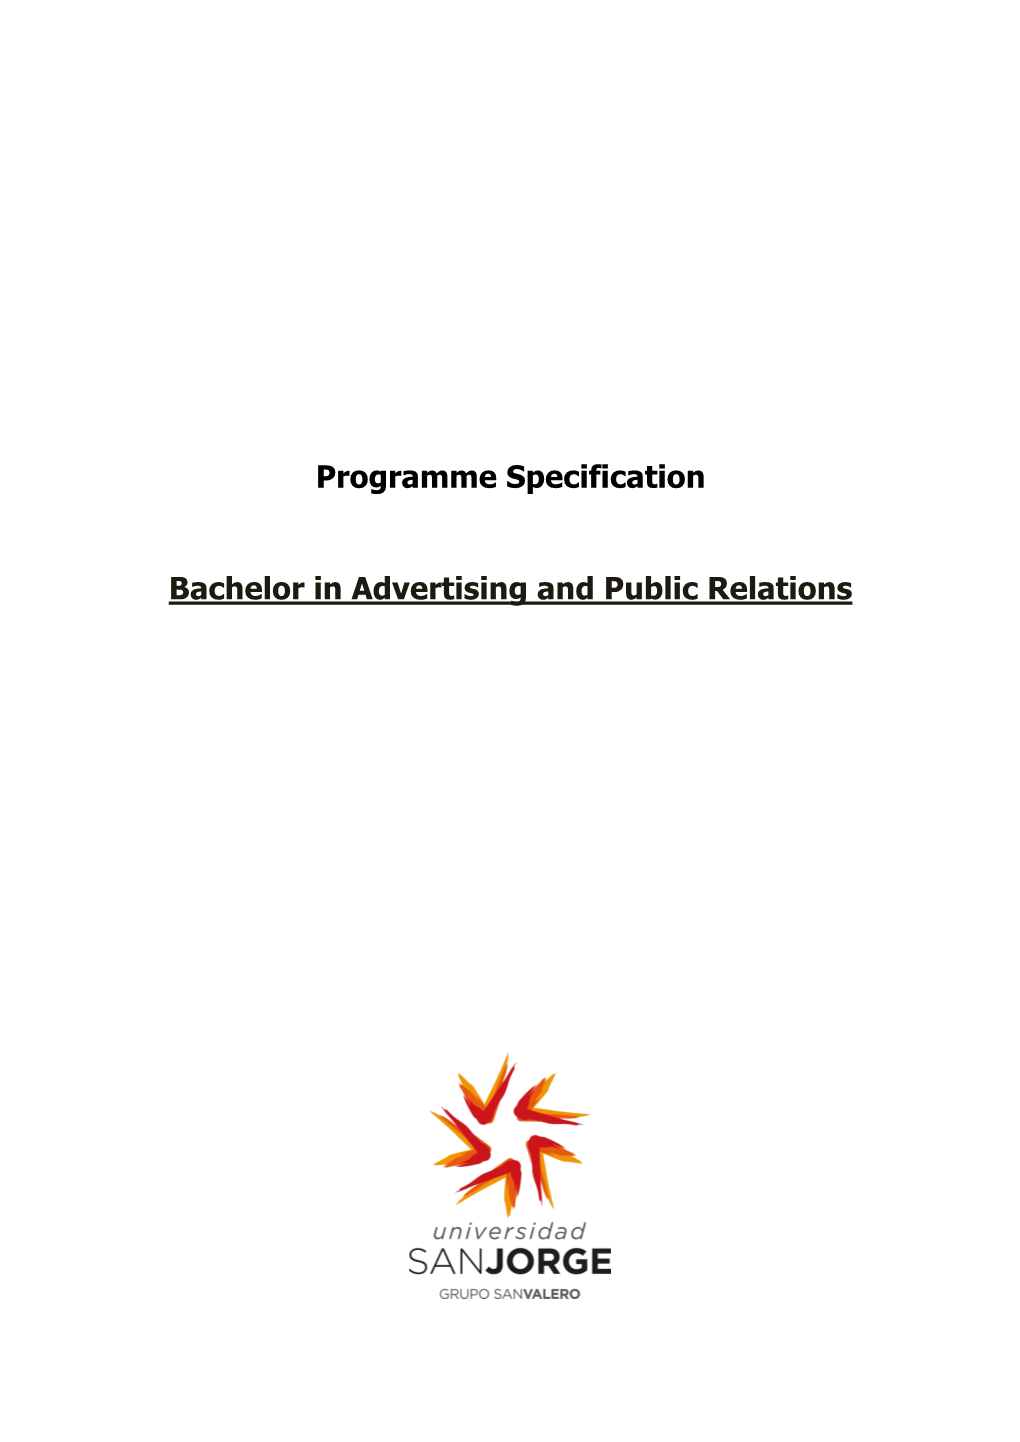 Programme Specification Bachelor in Advertising and Public Relations